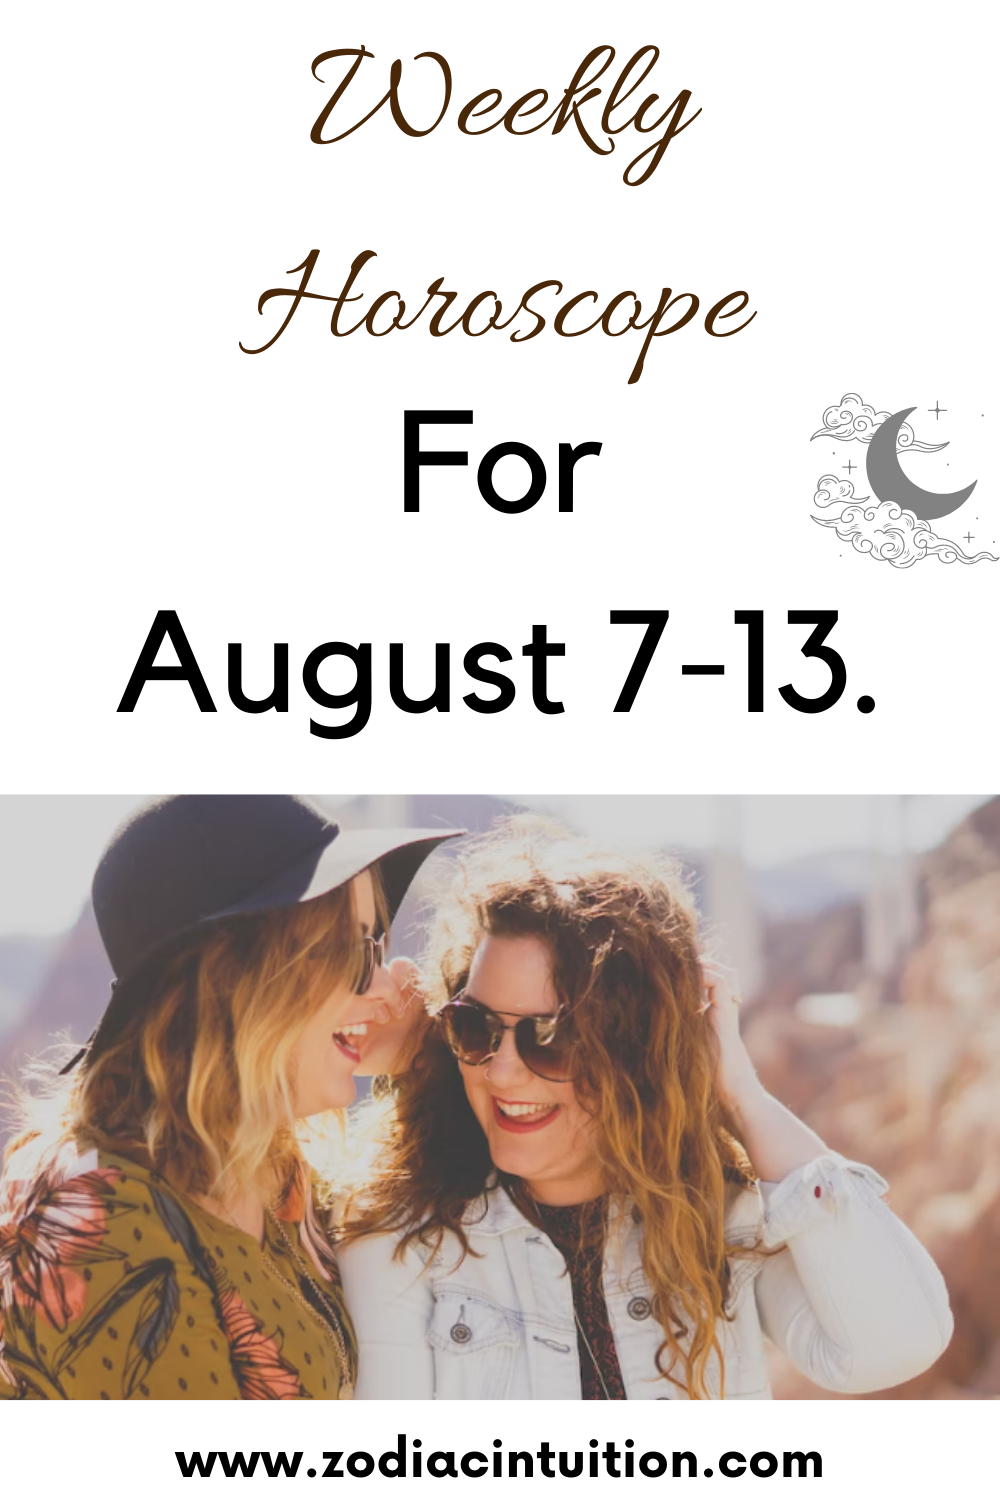 Weekly Horoscope For August 7-13.